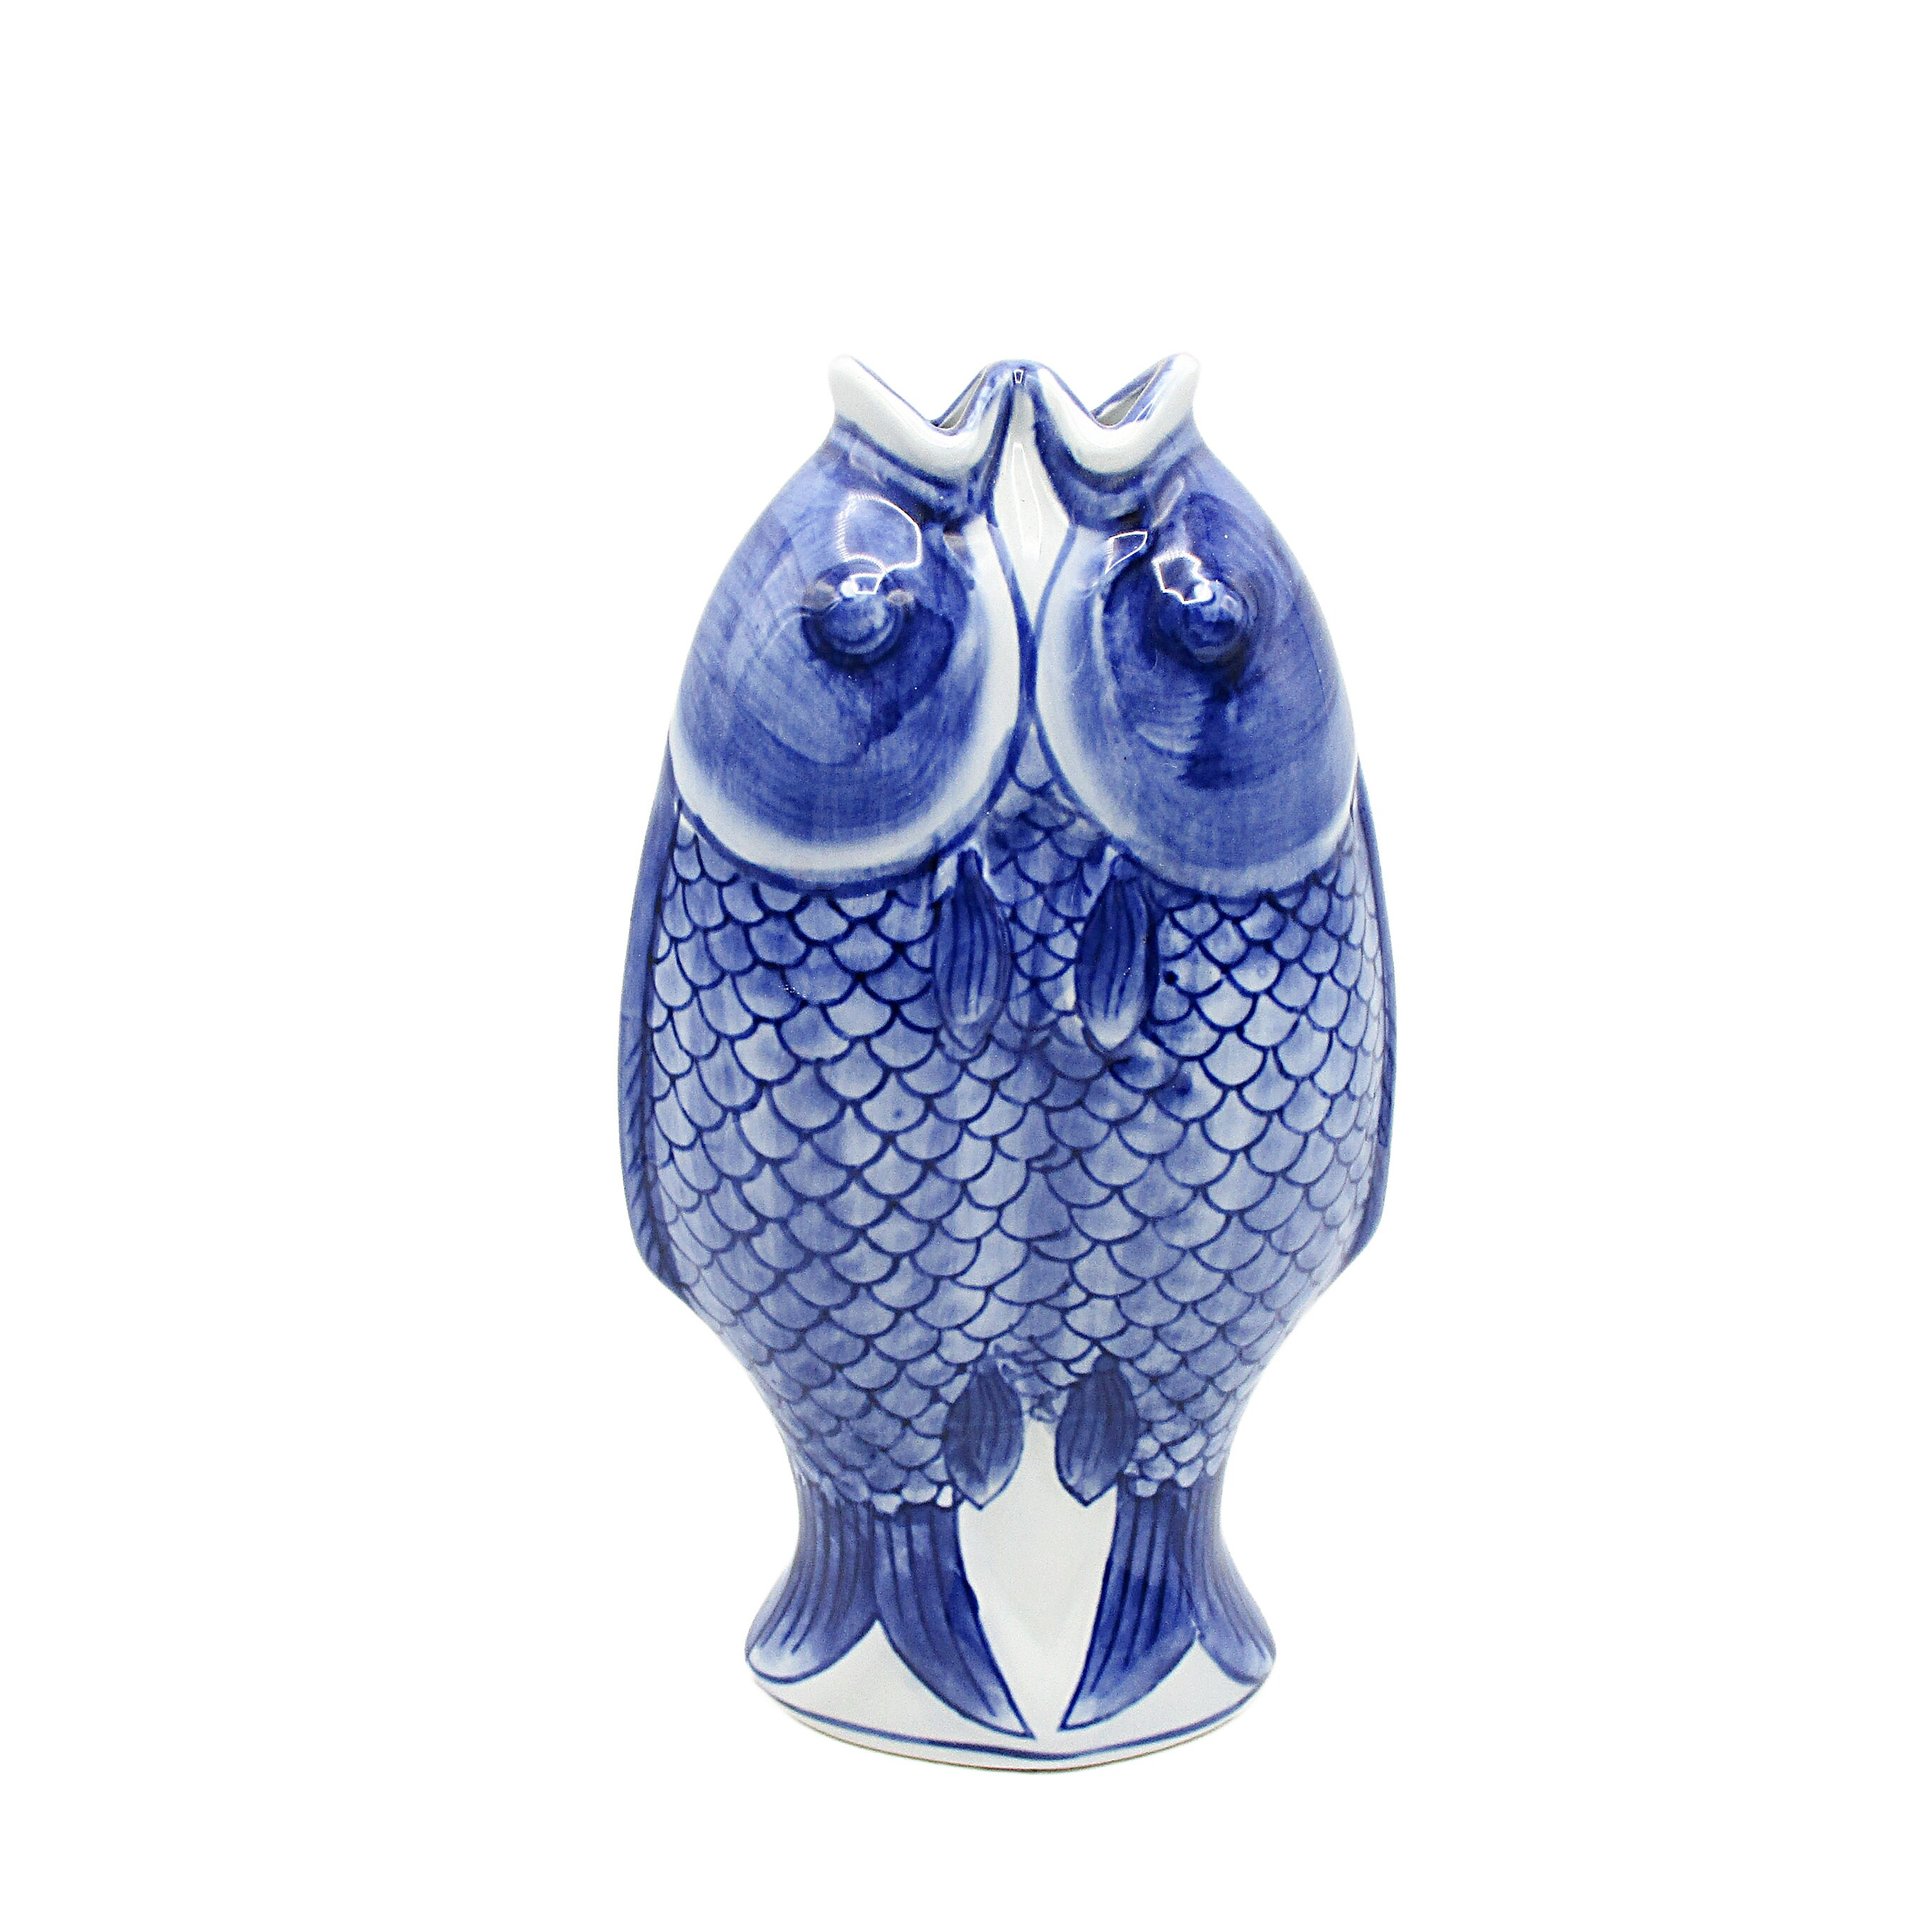 Double Koi Fish Vase Blue and White, Chinoiserie Decor, Tall and Heavy, Excellent Condition